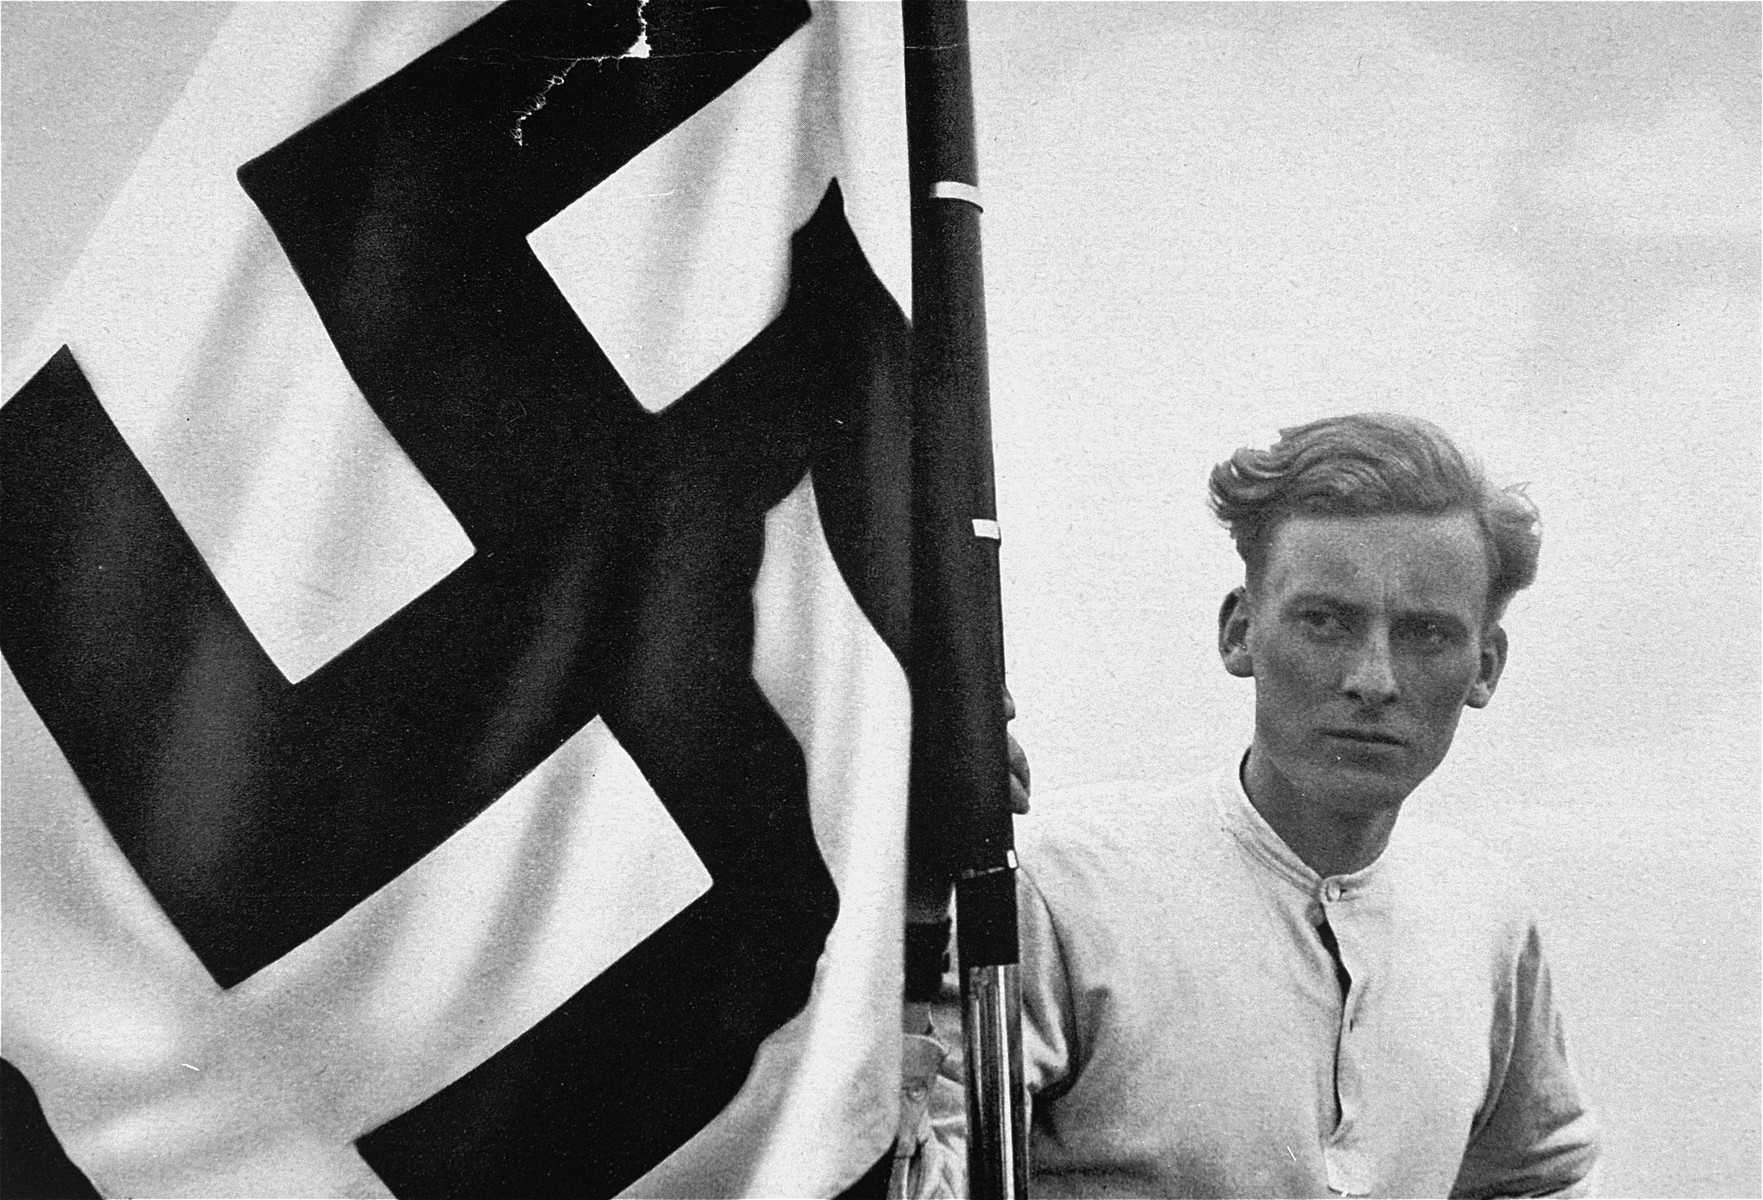 In this propaganda photograph a German youth poses with a National Socialist flag.  The German caption reads: "Our flag waves us onward."